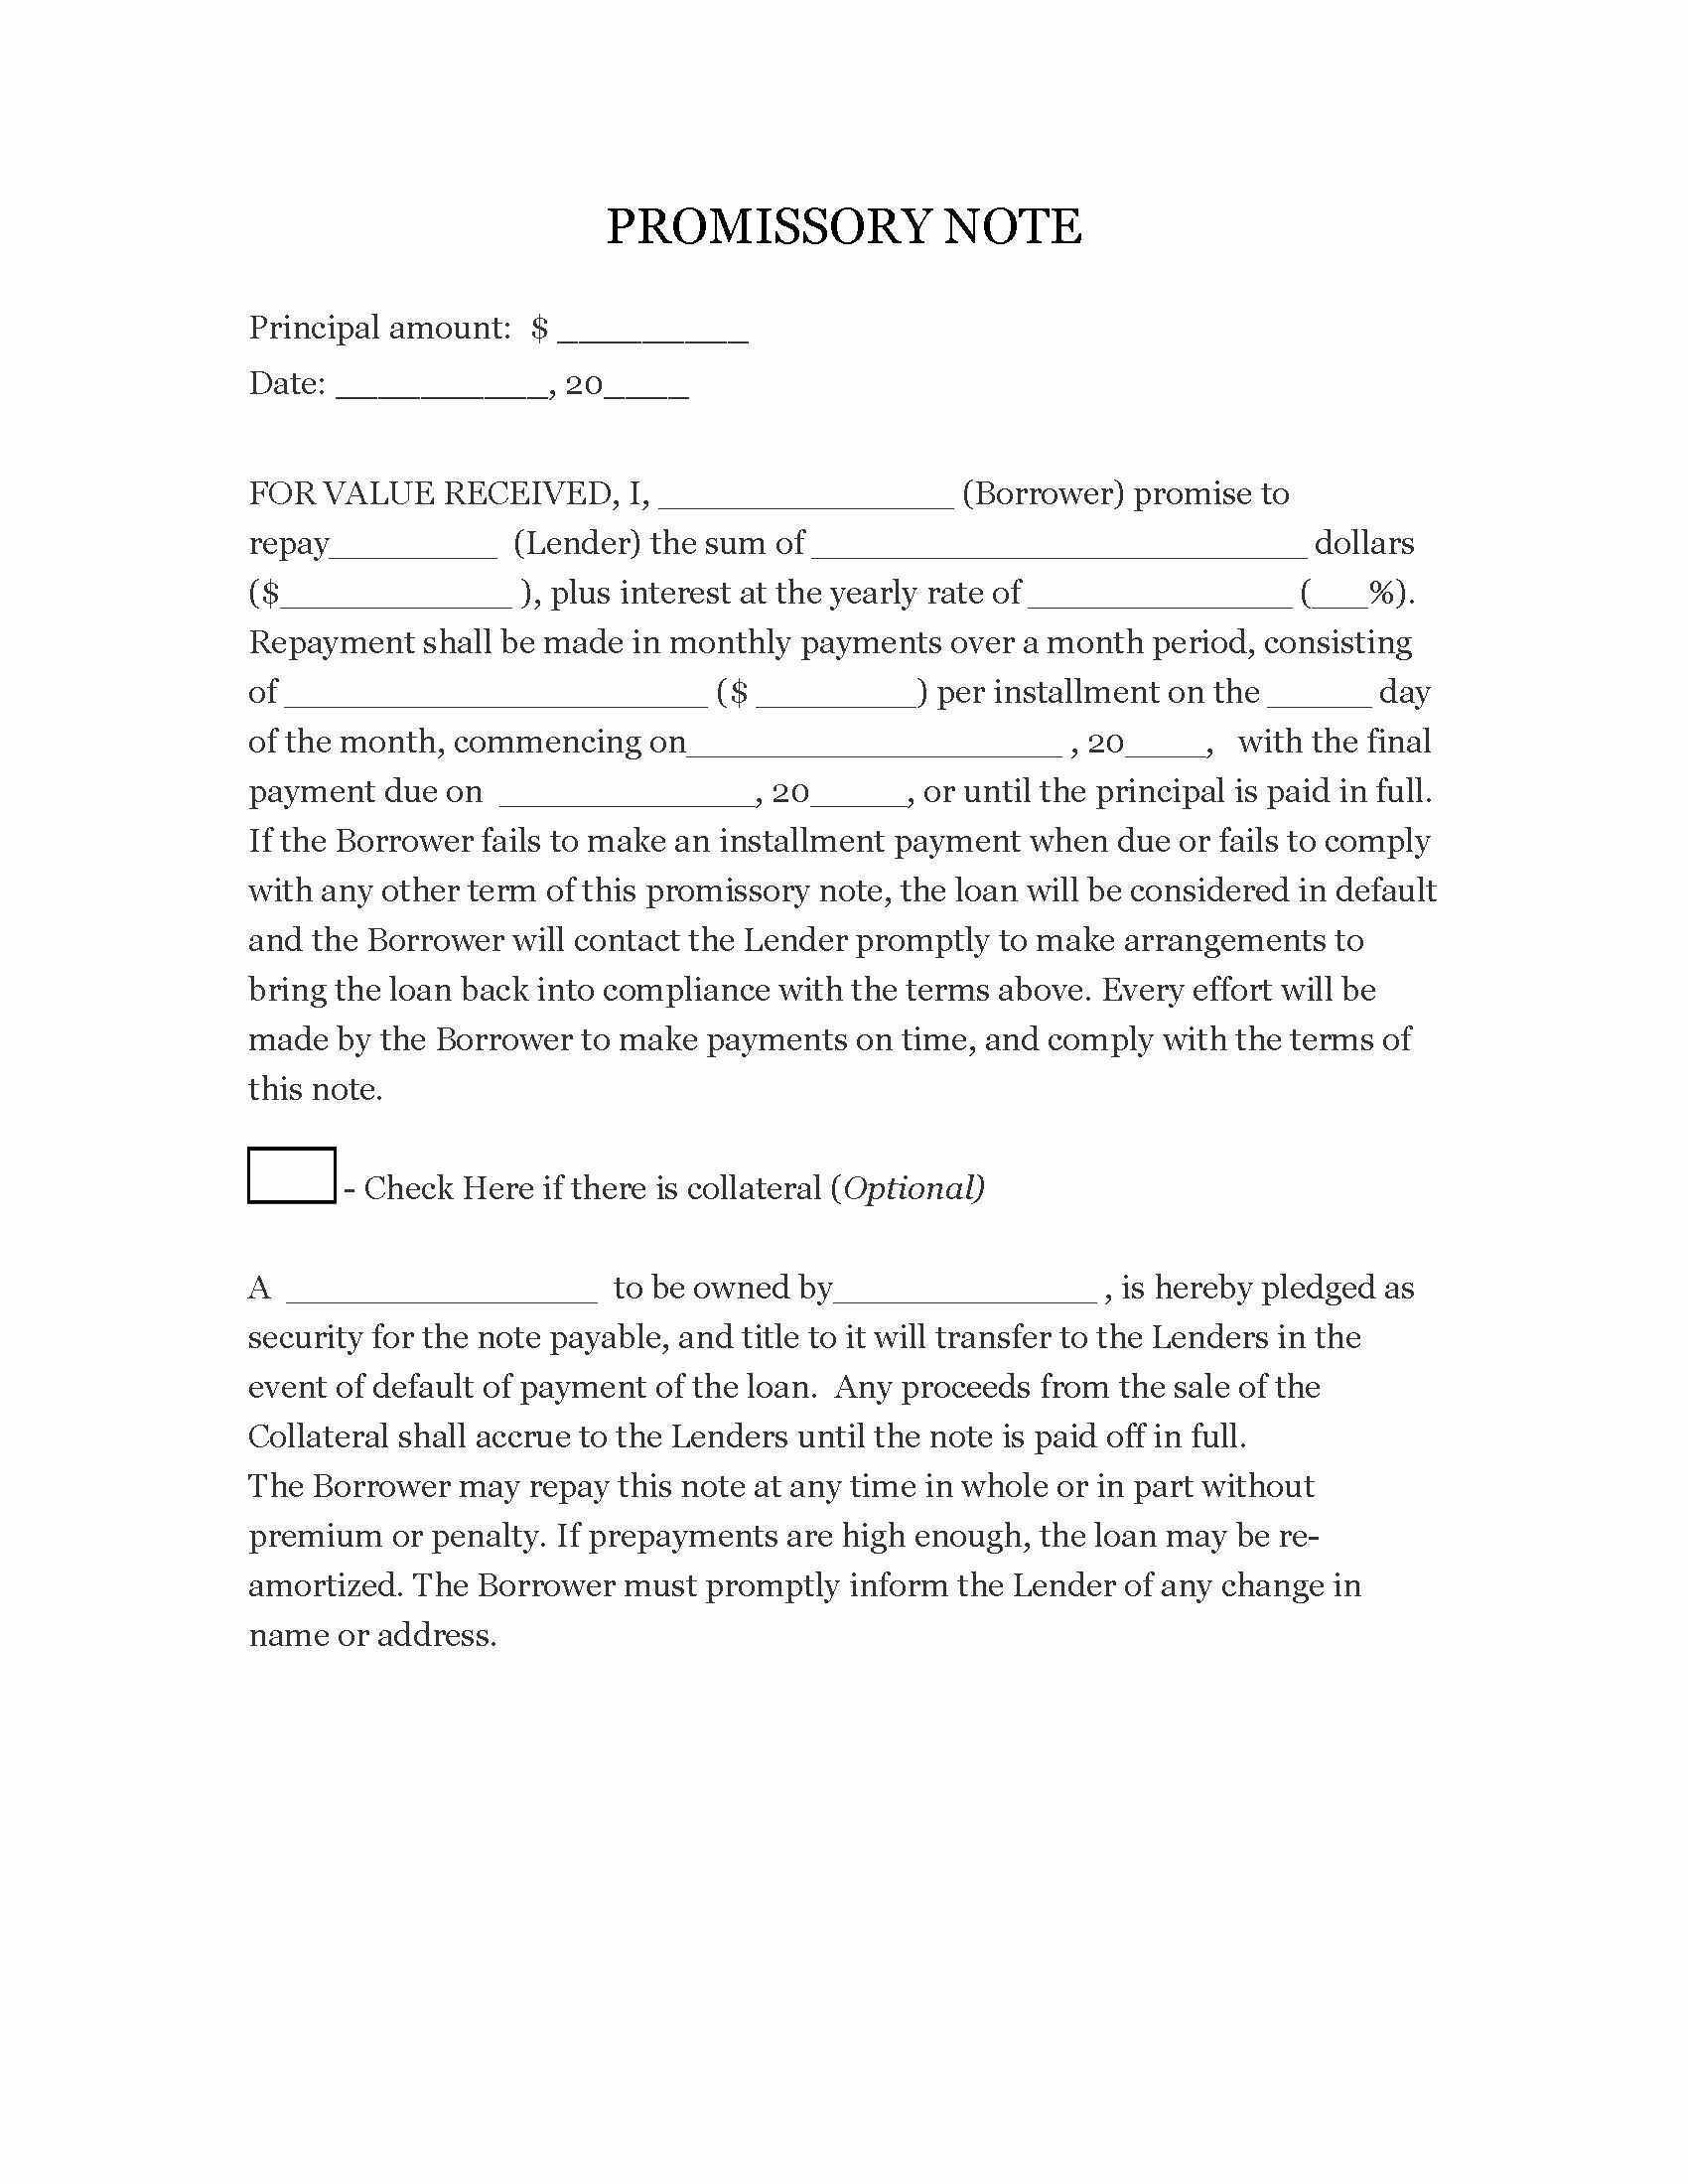 Promissory Note Template Florida Best Of Download Sample Promissory Note Template Pdf